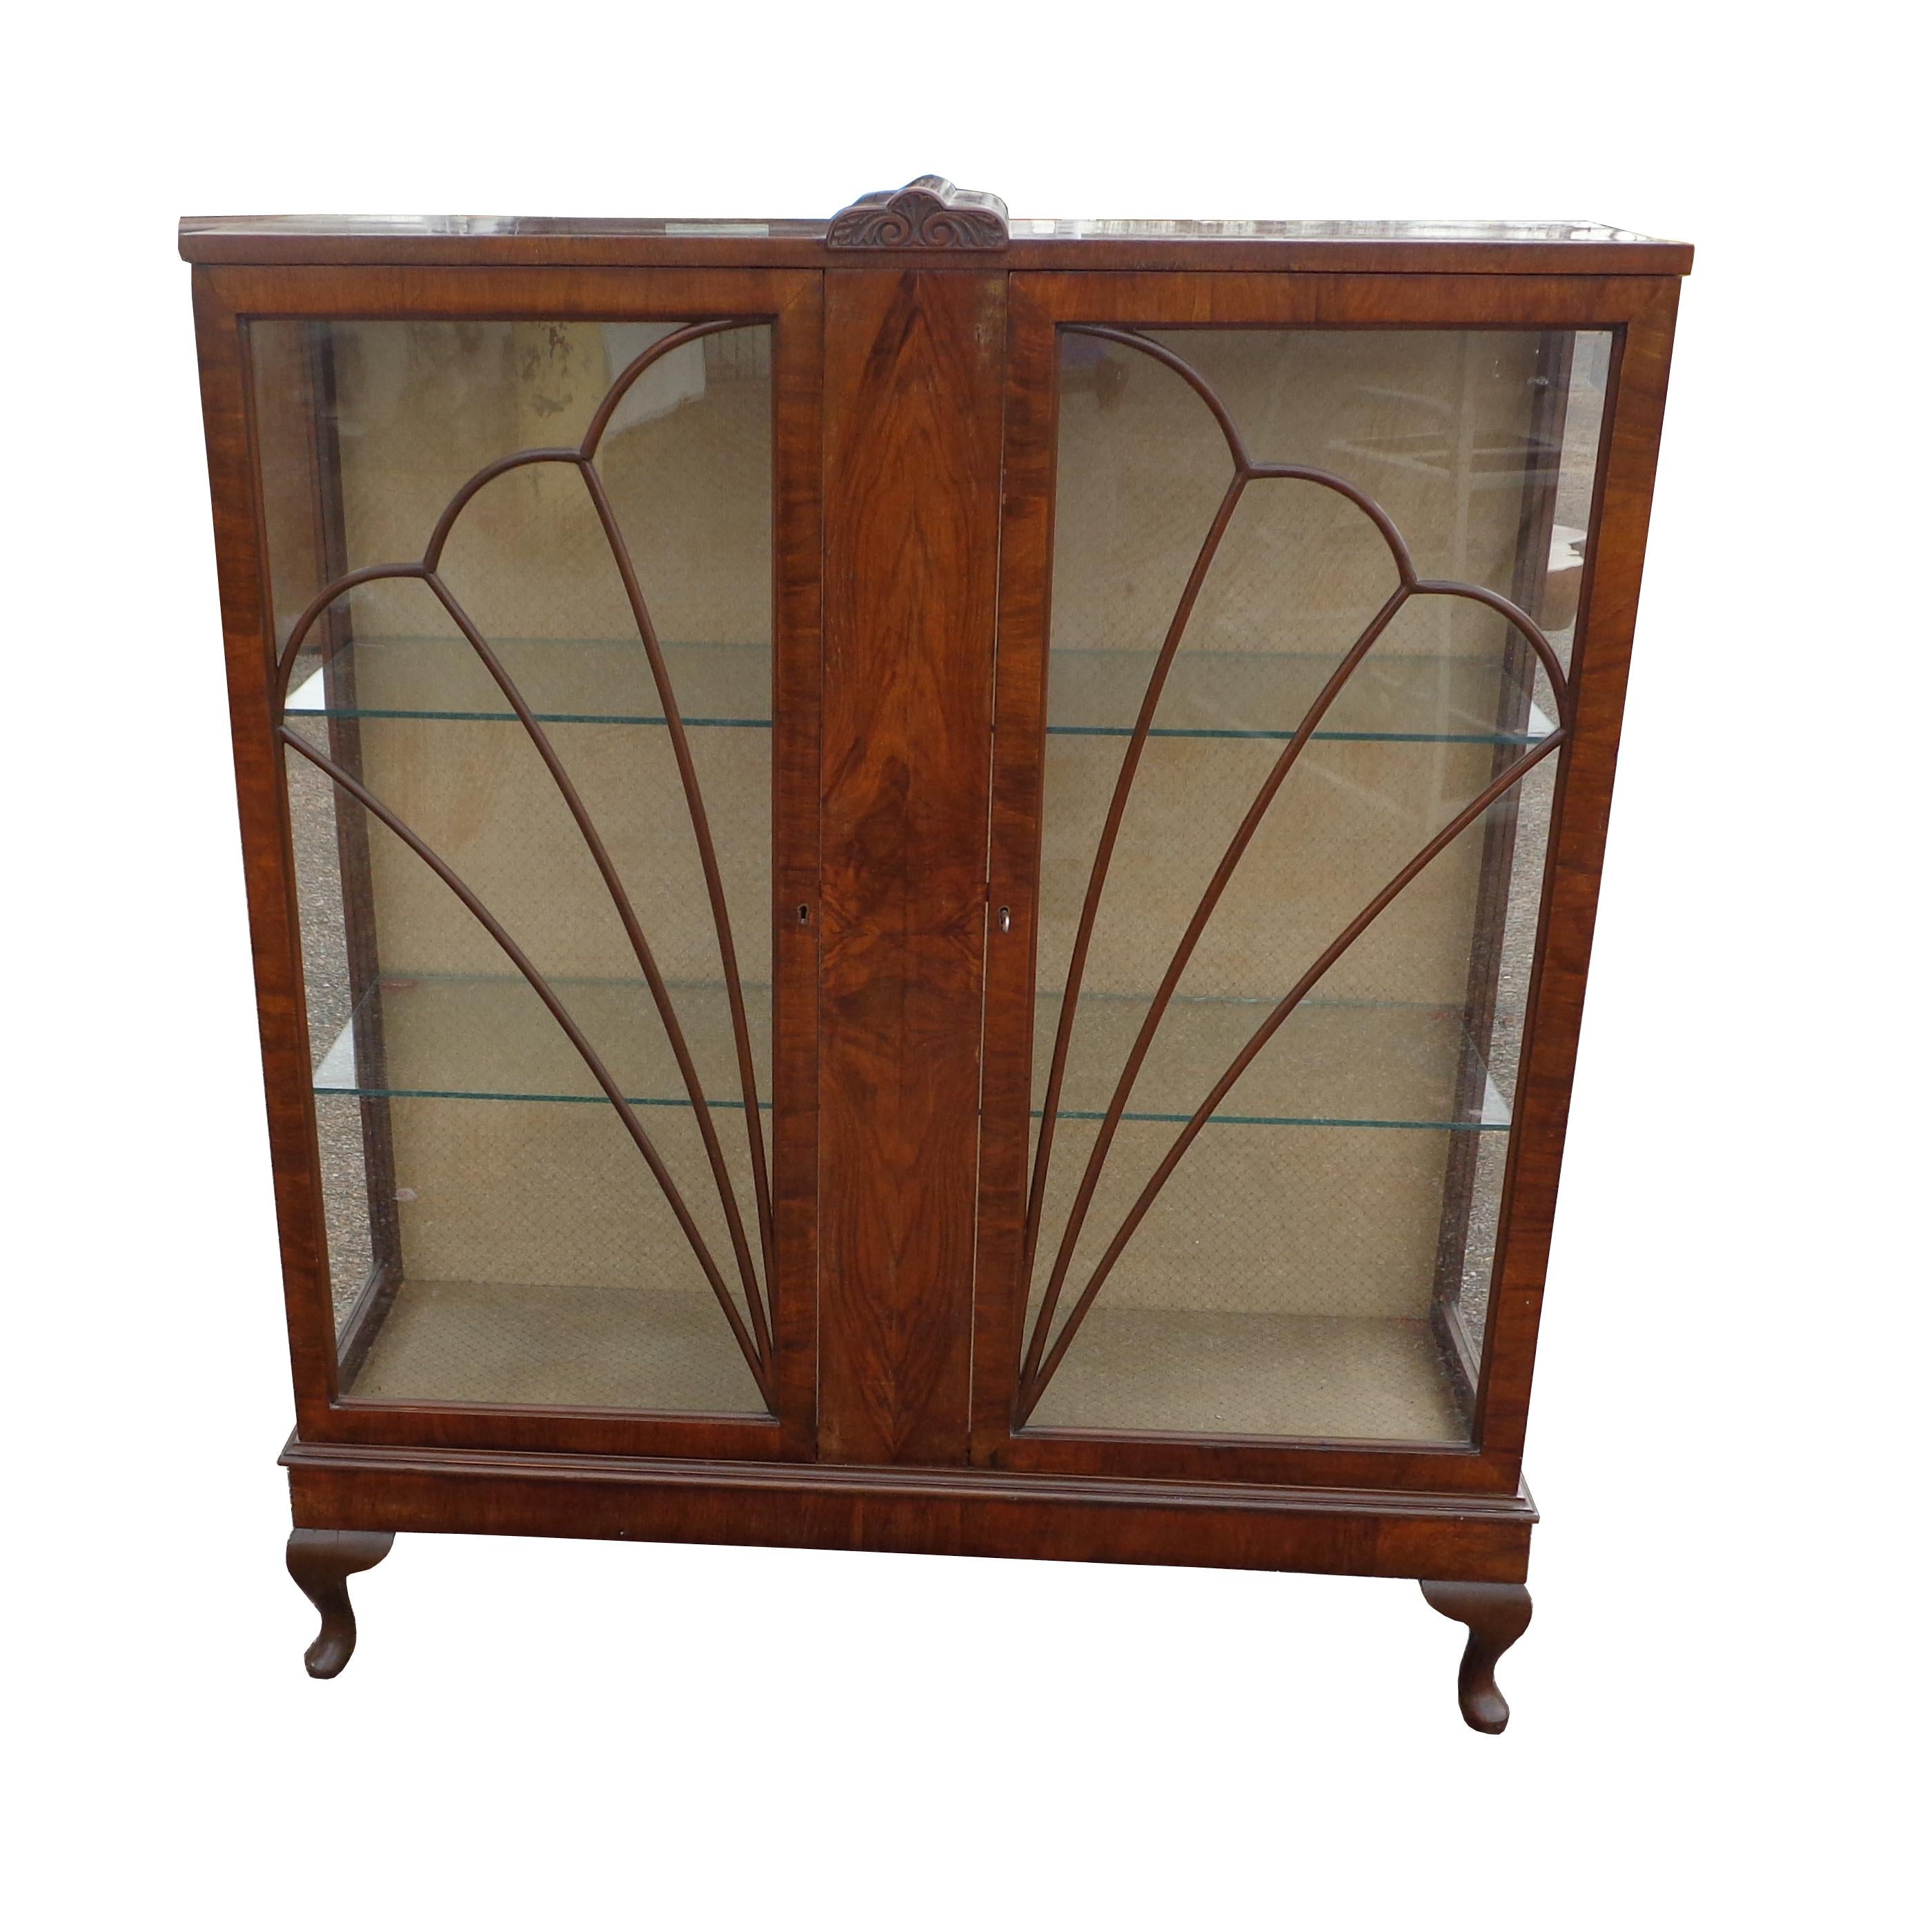 Queen Anne Art Deco glass display bookcase 

Art Deco curio bookcase from England circa 1920's. 

Burl wood with two glass doors inlaid with a beautiful leaded glass pattern. Two glass shelves and the original lock and working key included.